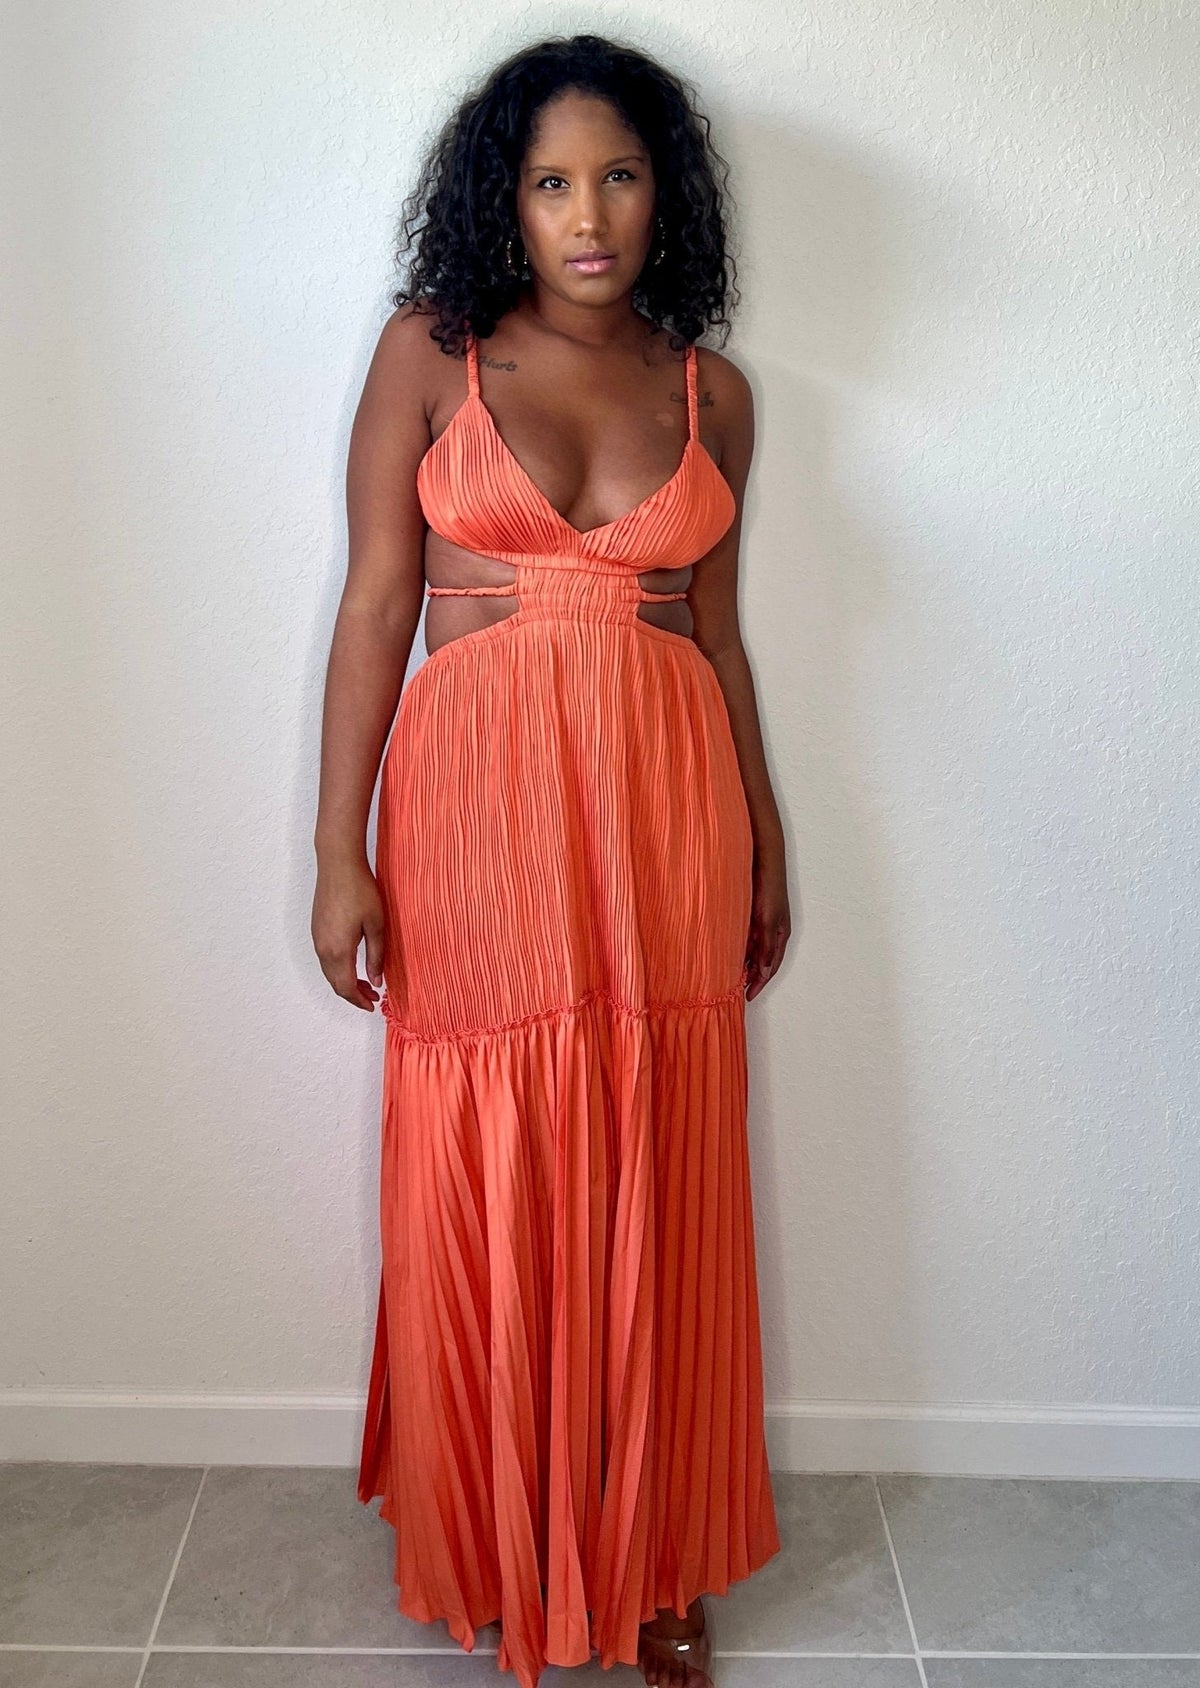 Get trendy with Orange Rust Crinkle Maxi Dress - Dresses available at ELLE TENAJ. Grab yours for $79.90 today!